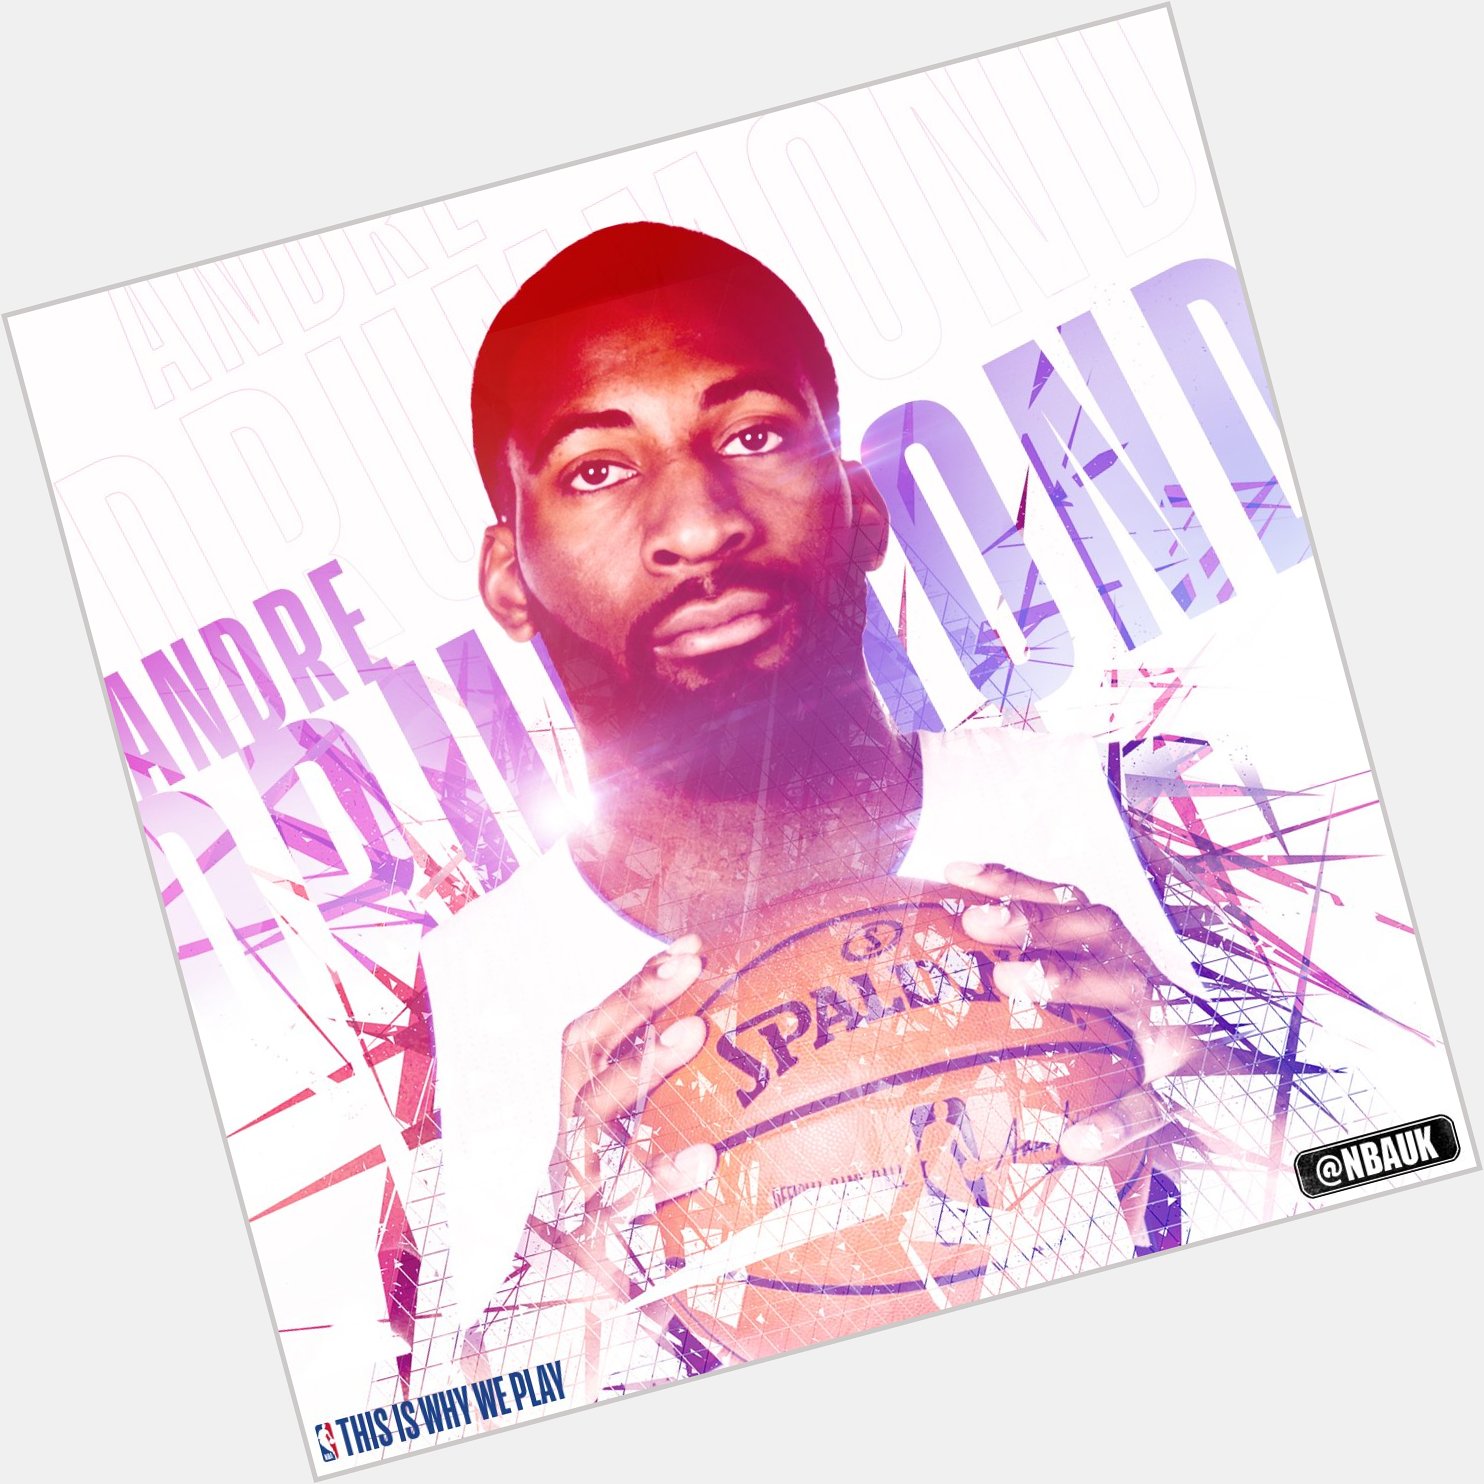   Join us as we wish Detroit Pistons big man Andre Drummond a very happy birthday! 